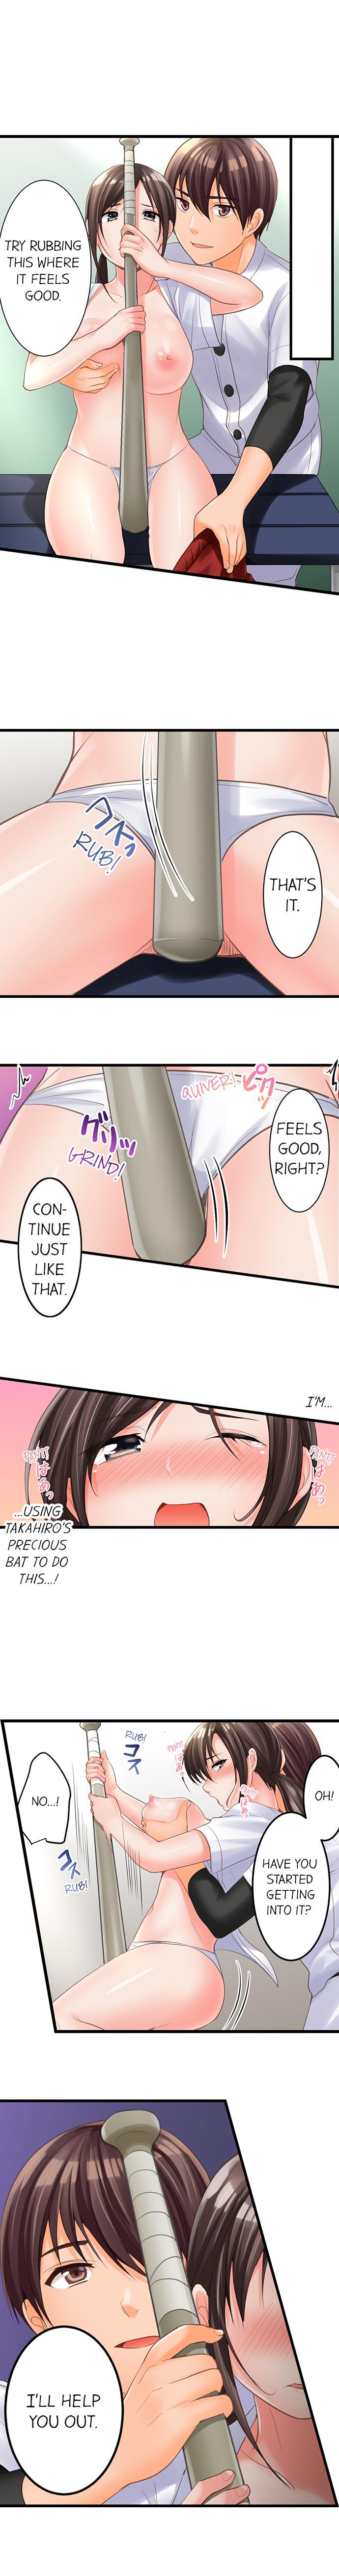 The Day She Became a Sex Toy (Complete] 34